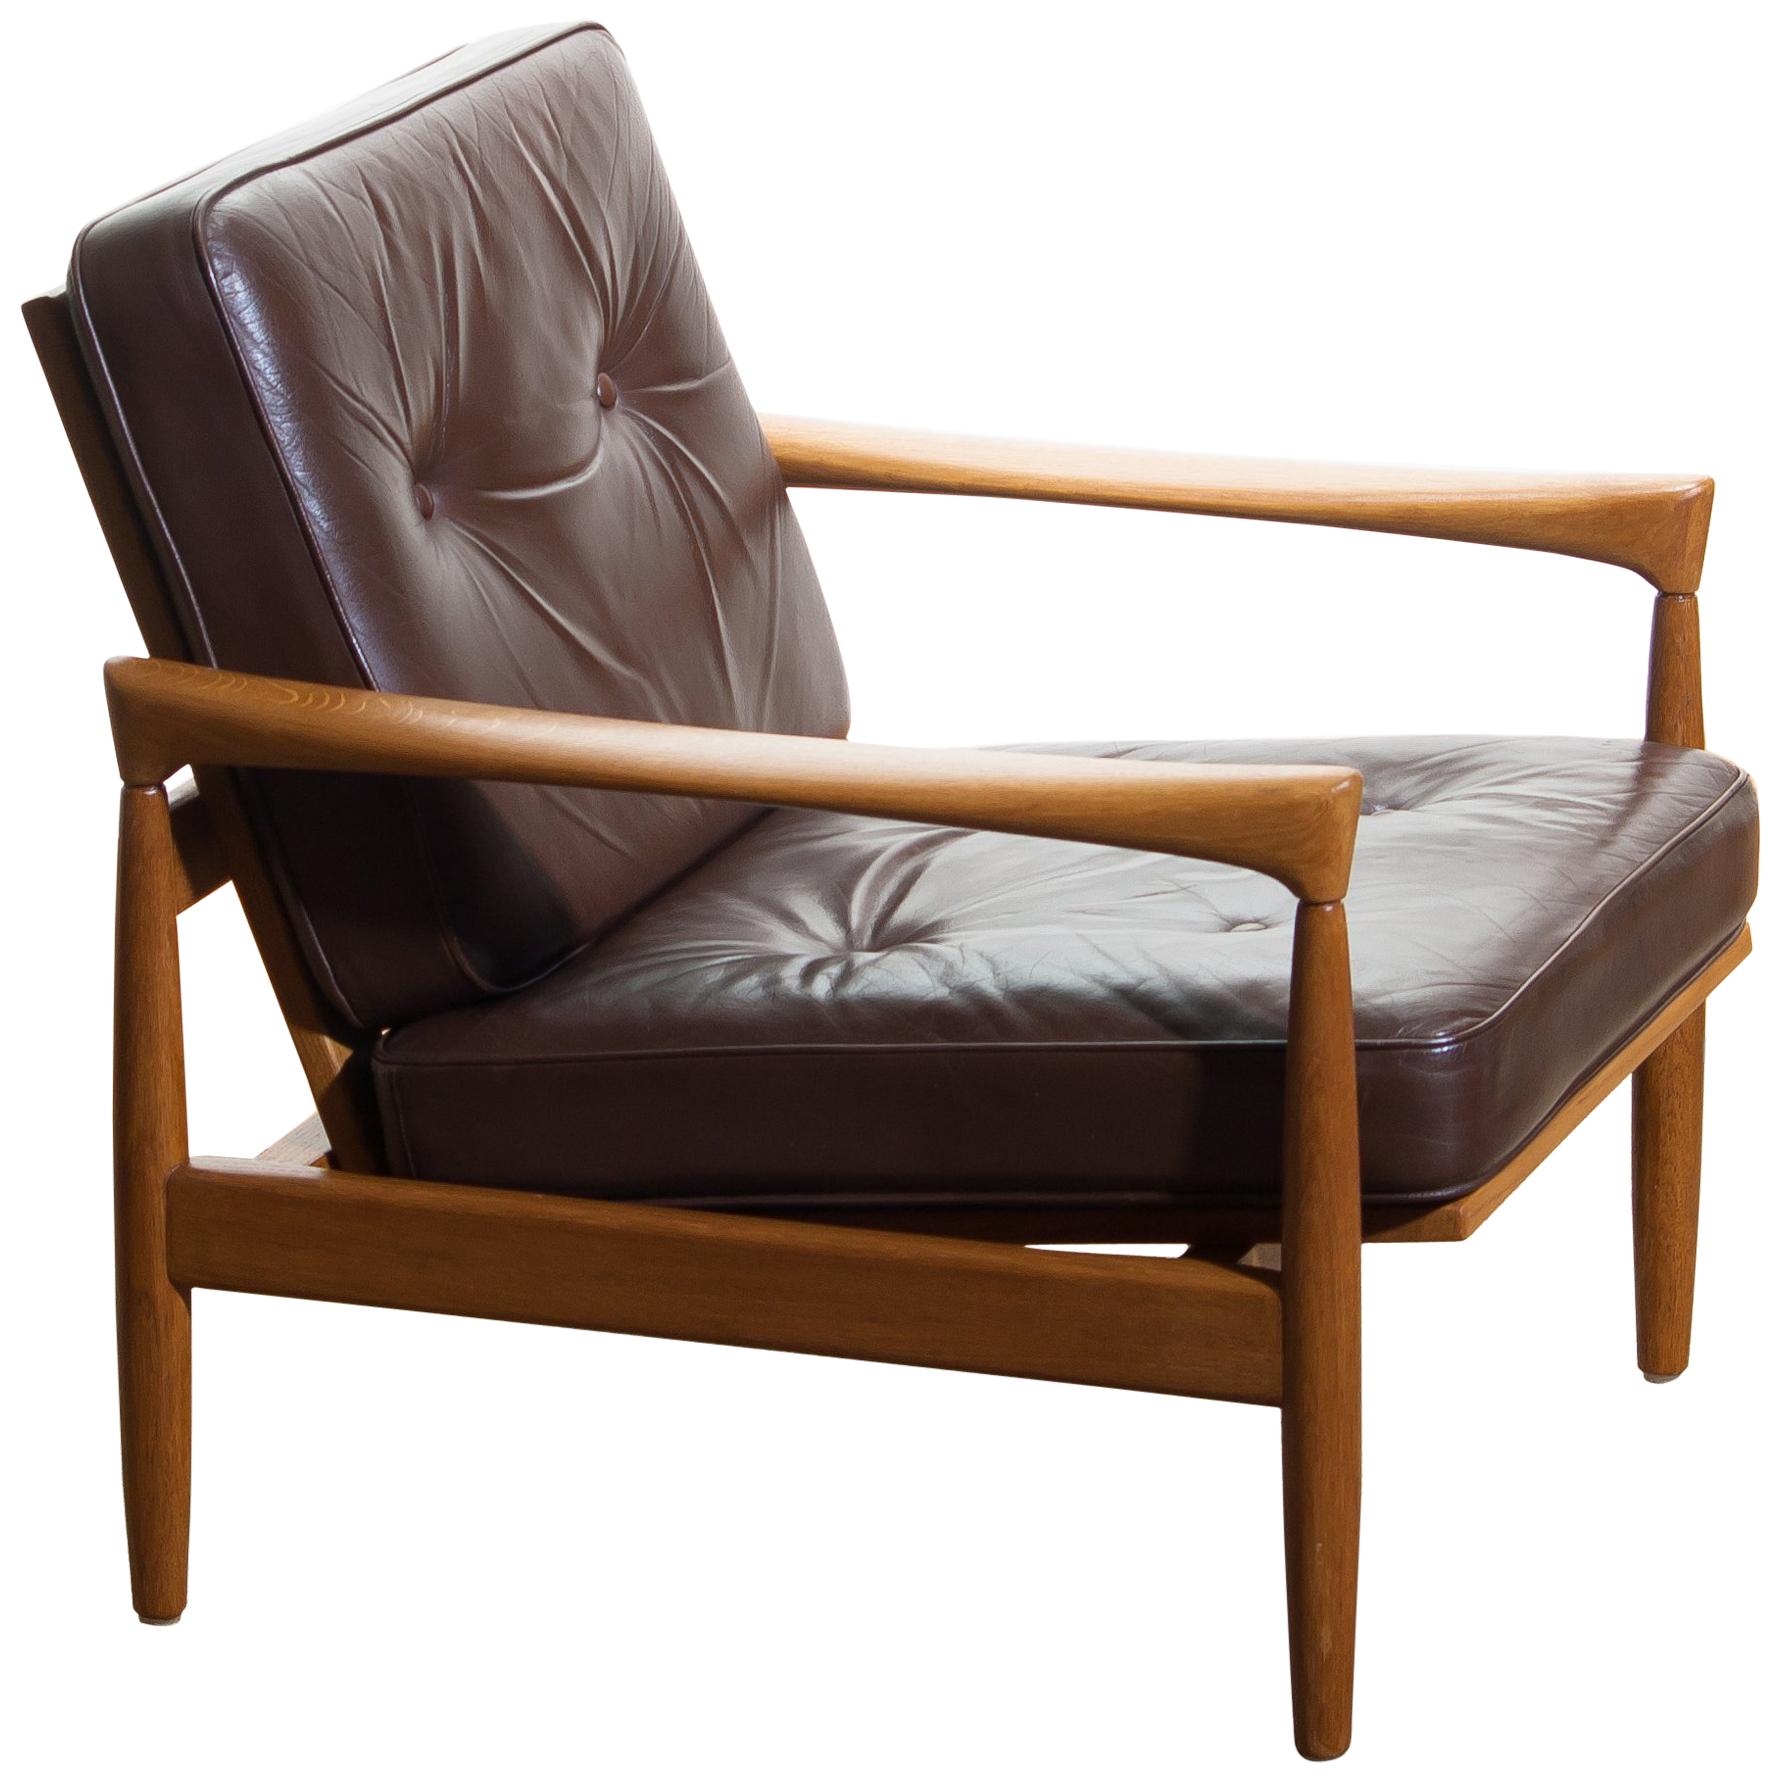 Mid-Century Modern 1960s, Oak With Brown Leather Lounge Chair by Erik Wörtz for Bröderna Anderssons